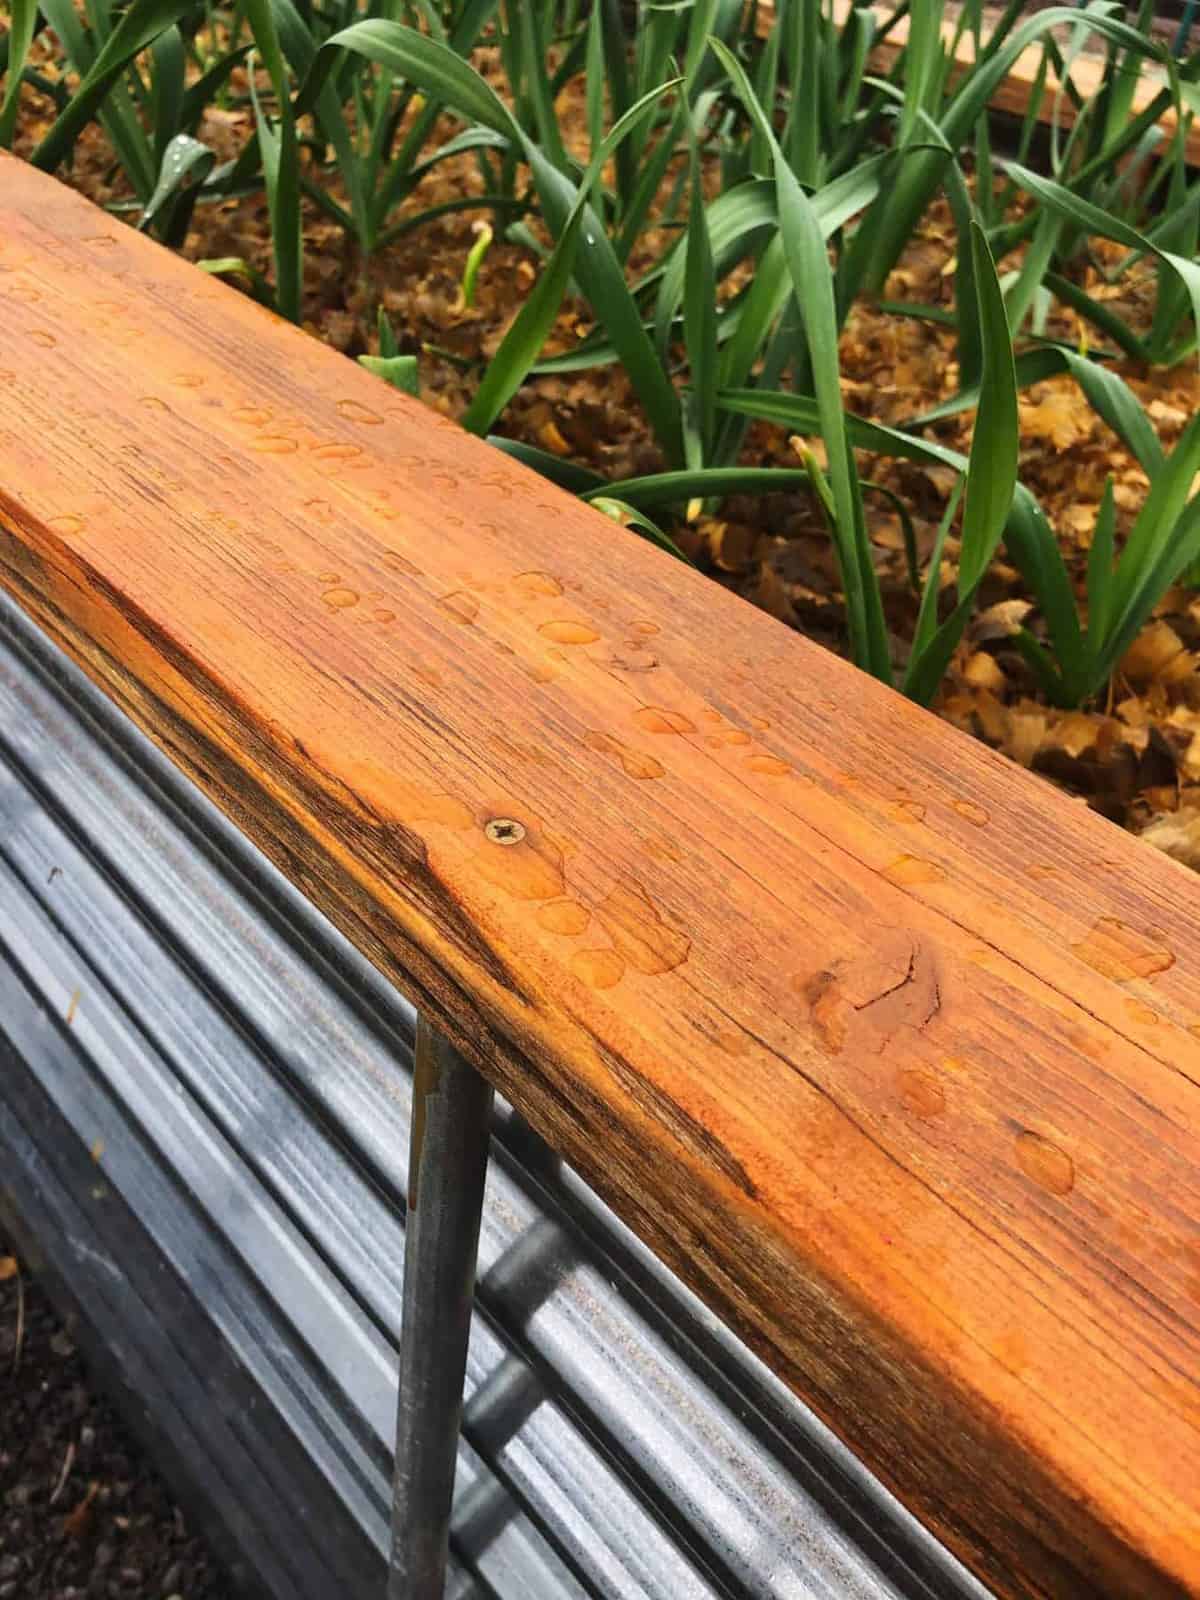 Tight view of a raised garden bed with a screw in a cedar board.